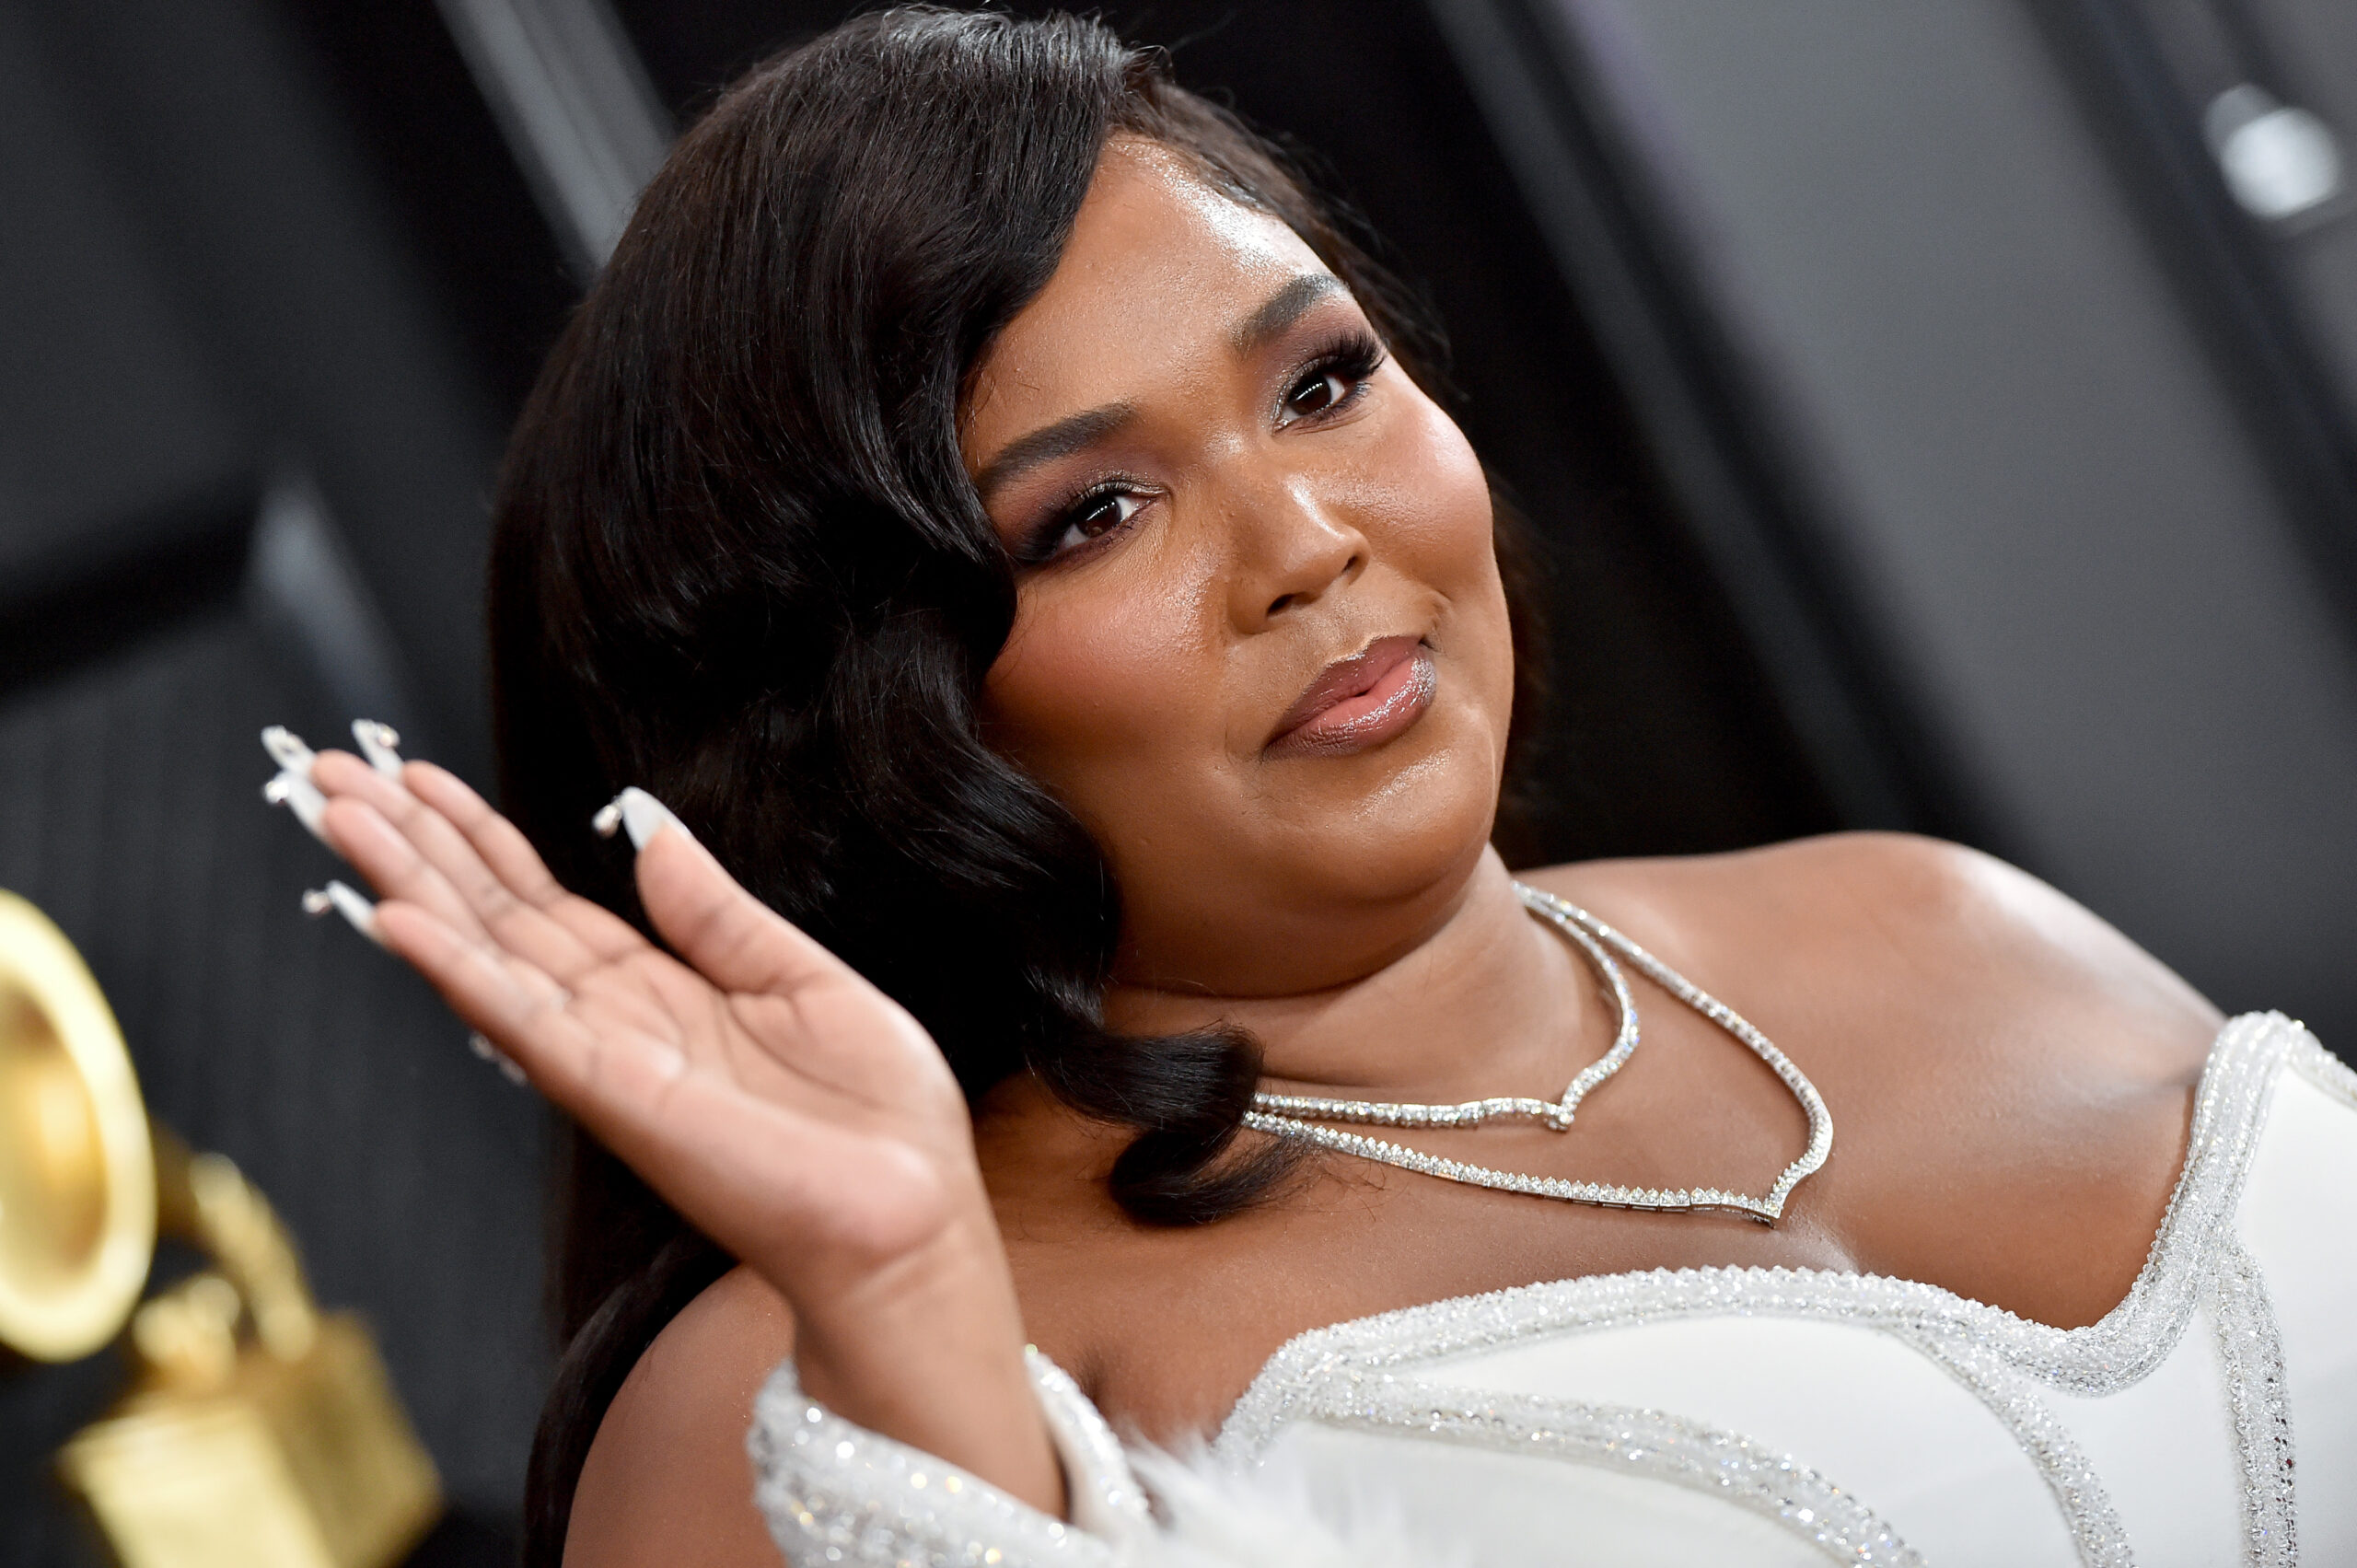 Lizzo Was *Almost* Featured In The “WAP” Video